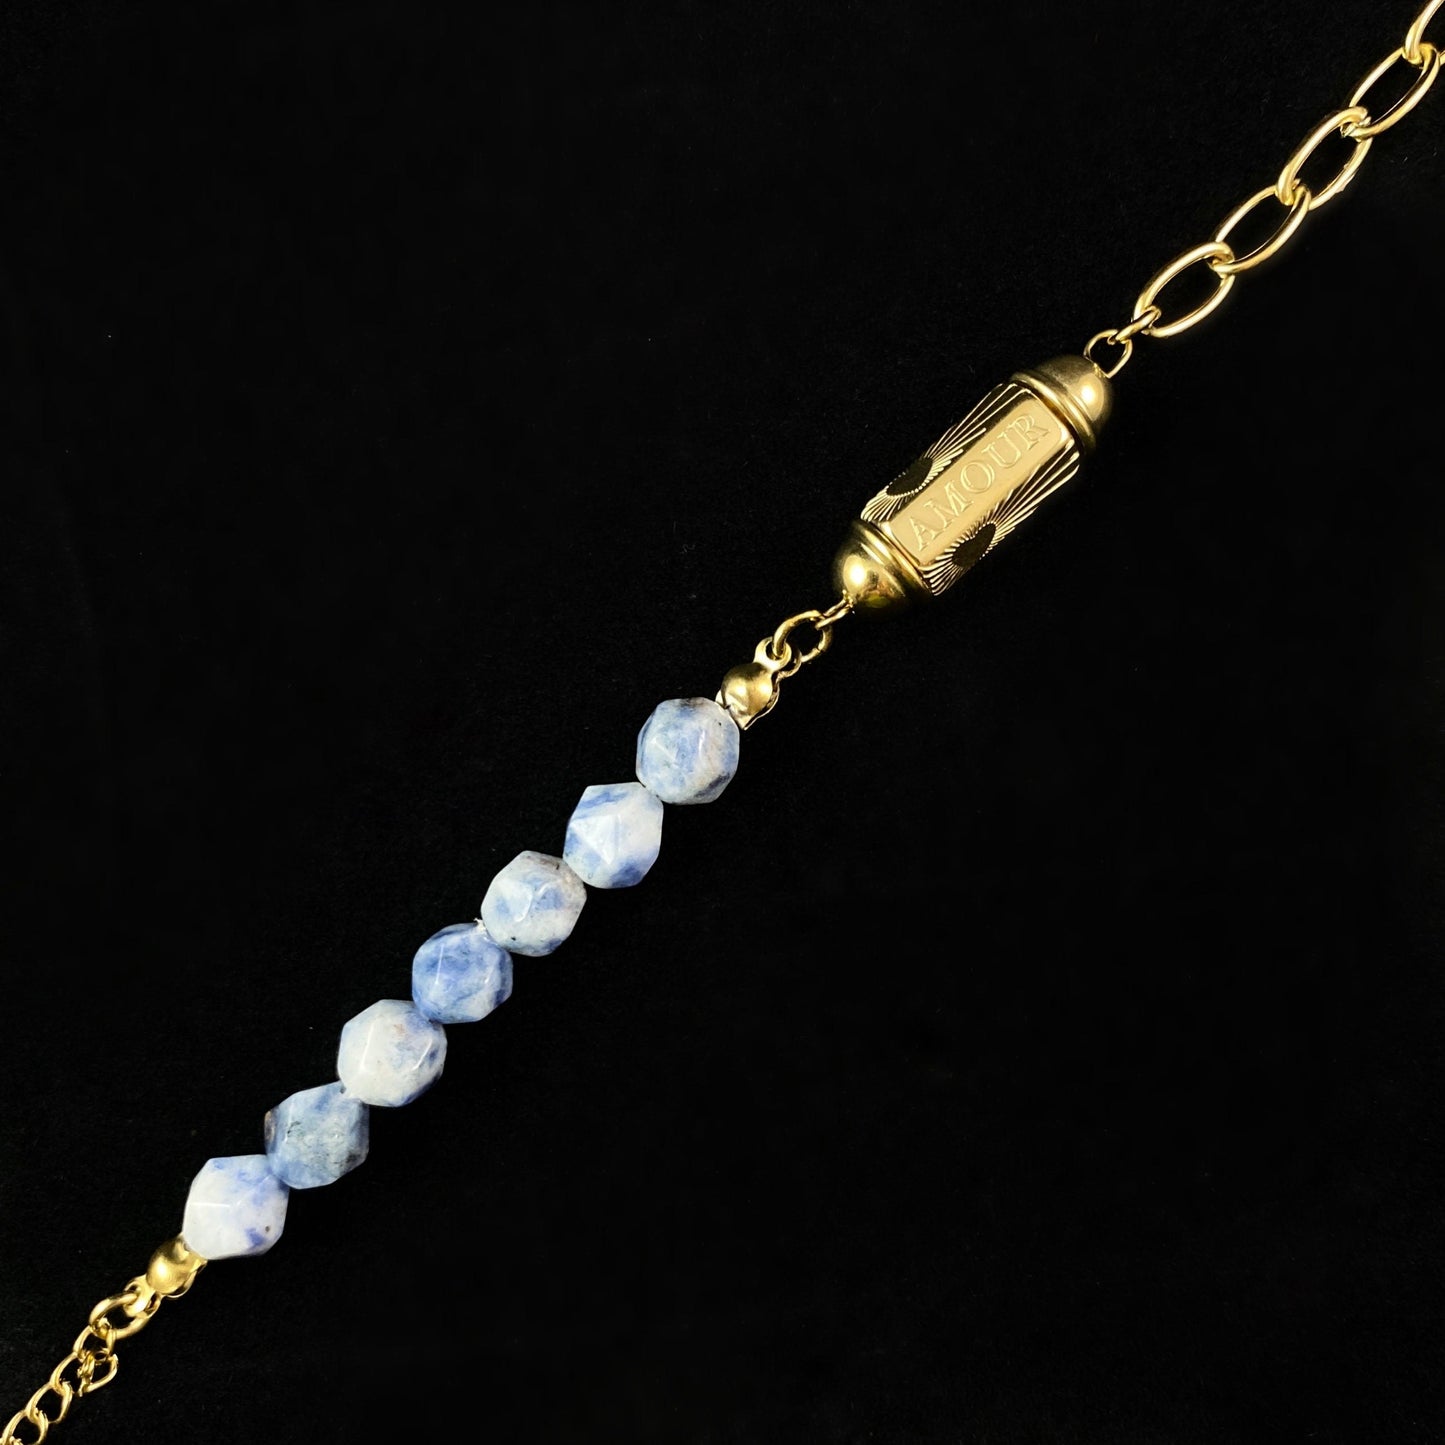 Blue Natural Stone Bracelet with Love/Amour Calligraphy and Dainty Gold Heart Detailing